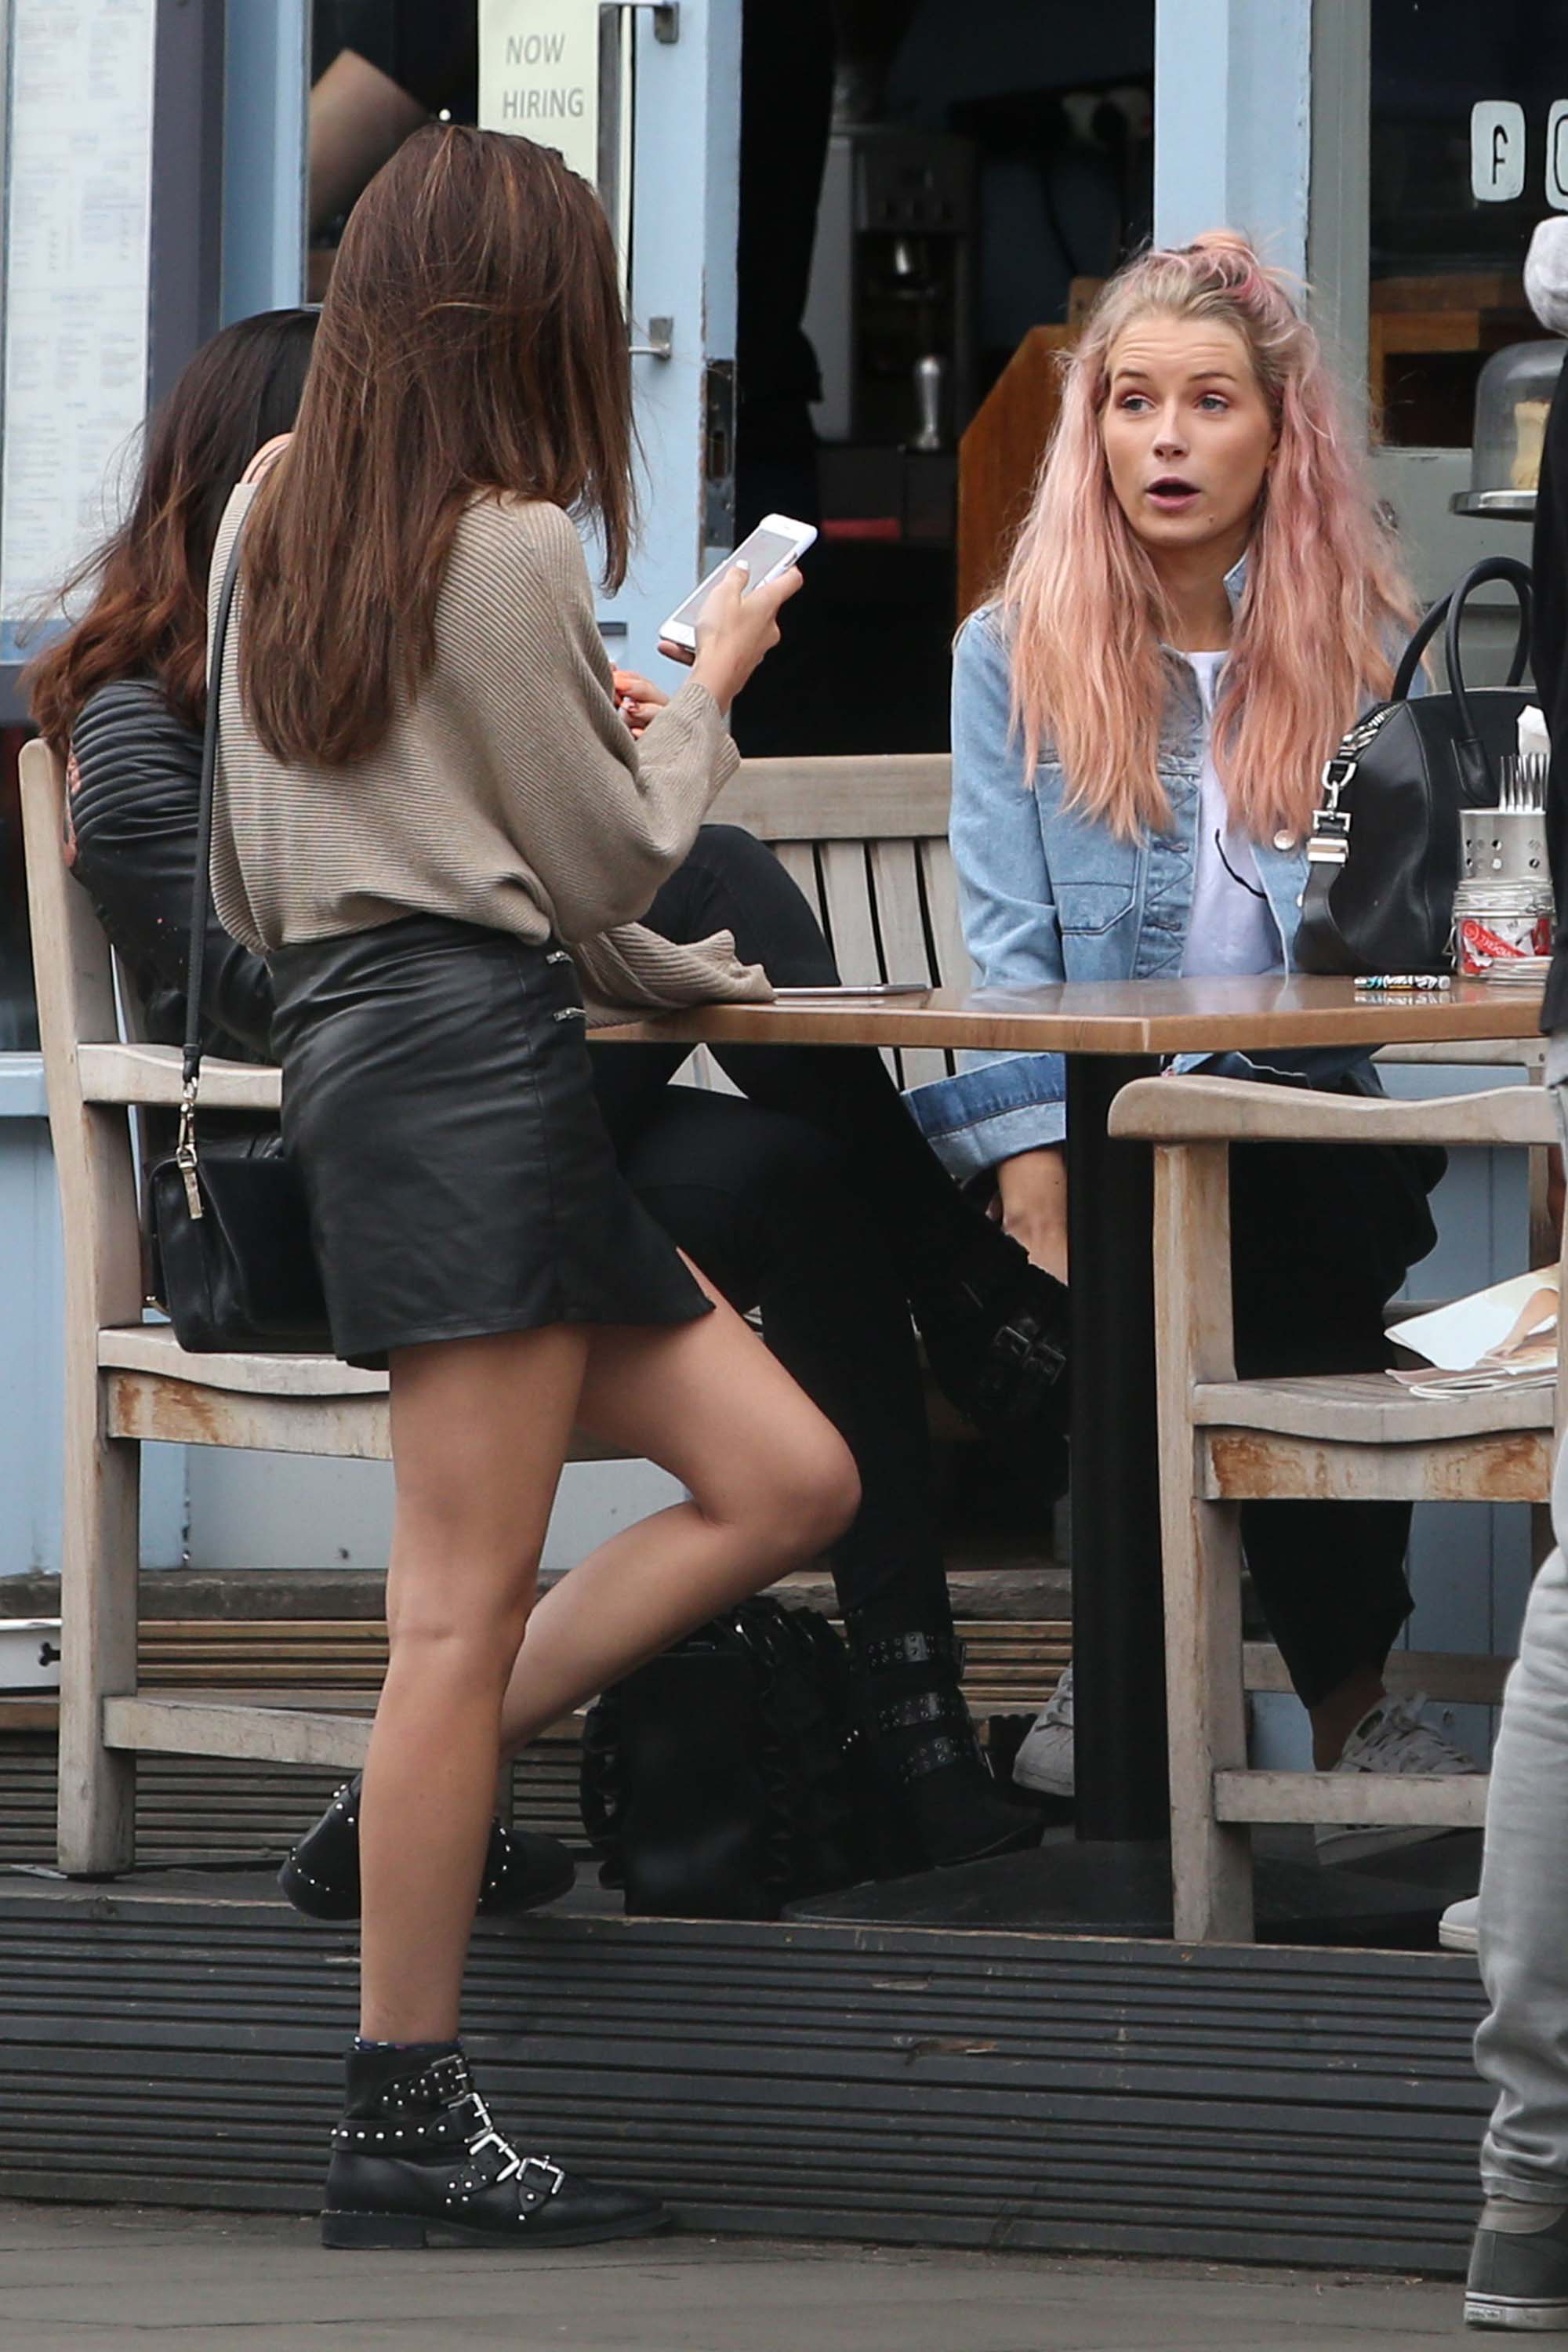 Lottie Moss and Frankie Gaff out and about